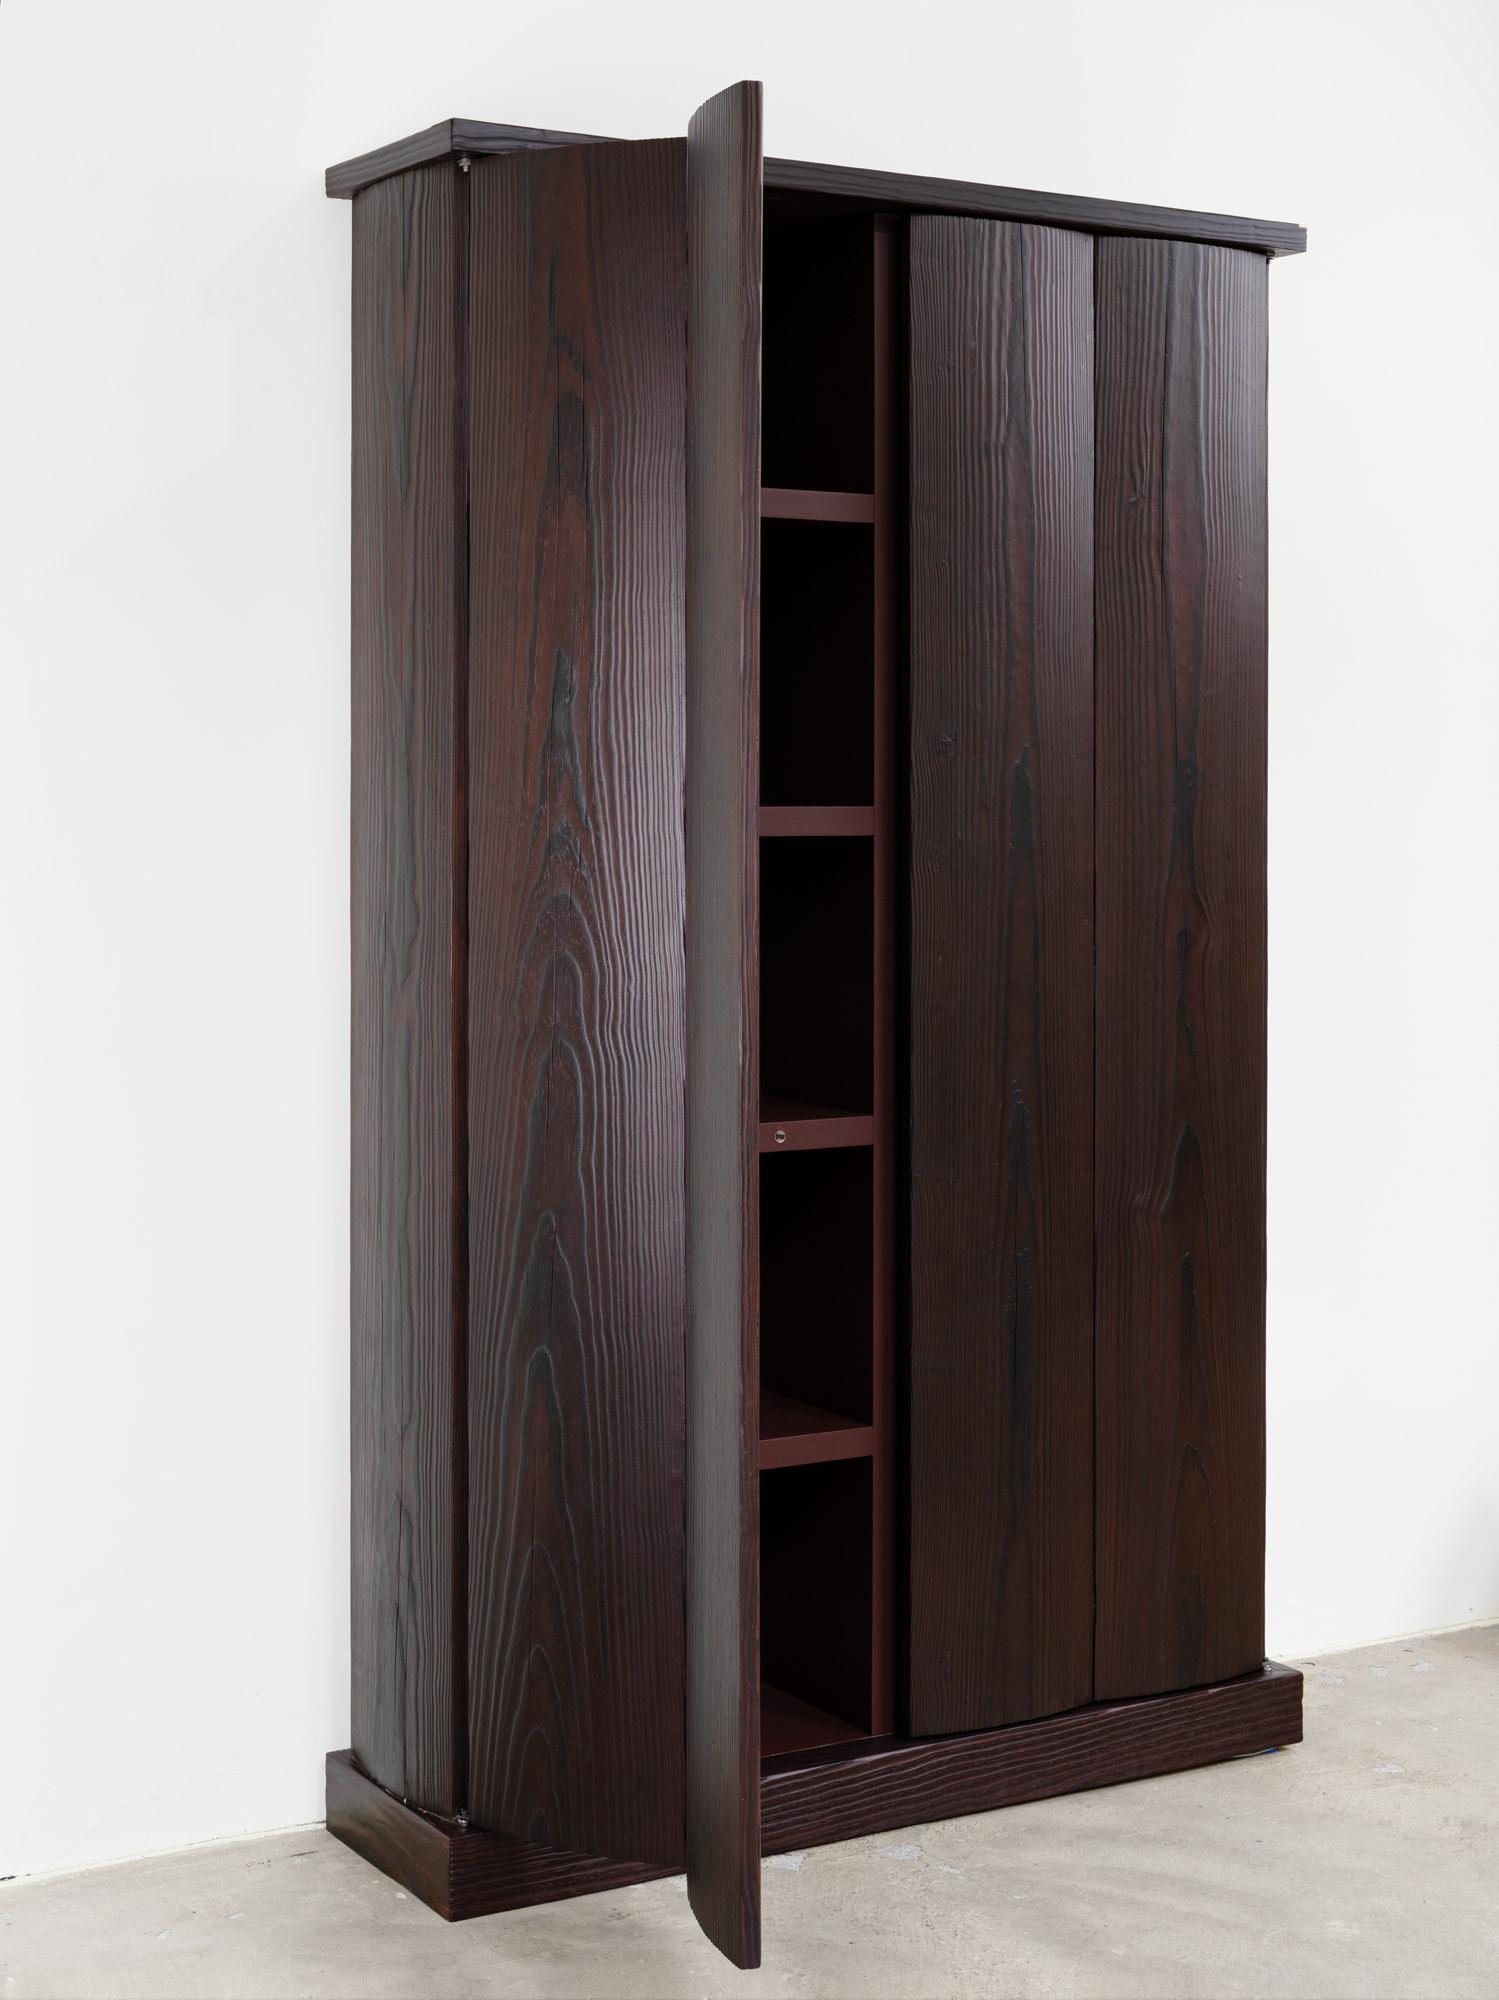 Belgian Burned Yellowpine, Night Red Stained Black Norma Cabinet by Tim Vranken For Sale